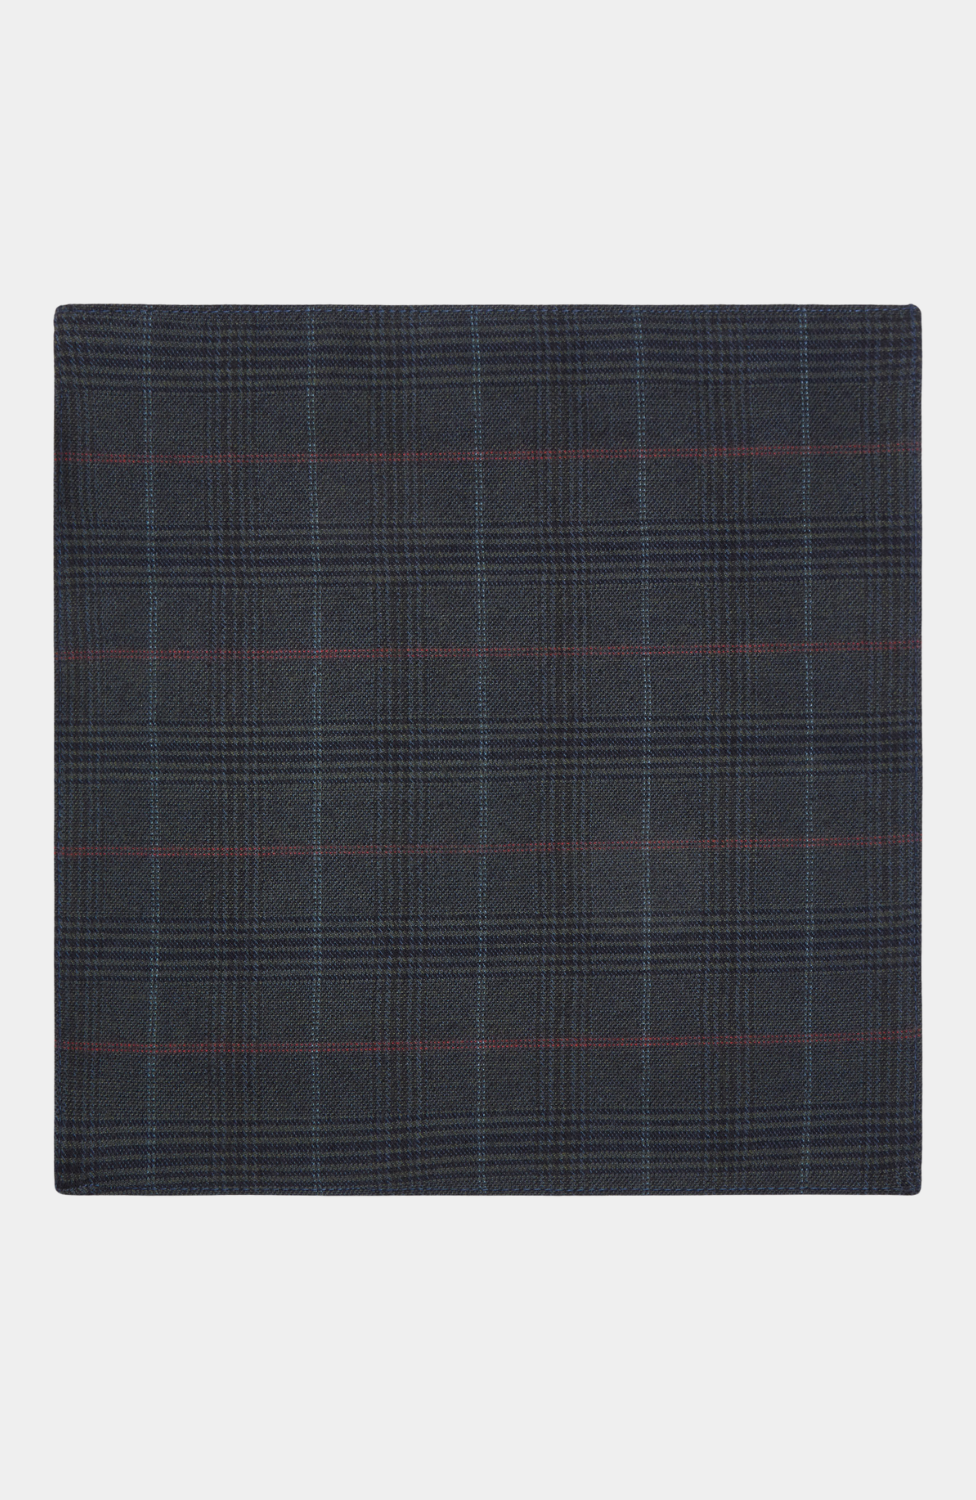 ANGLESEY POCKET SQUARE